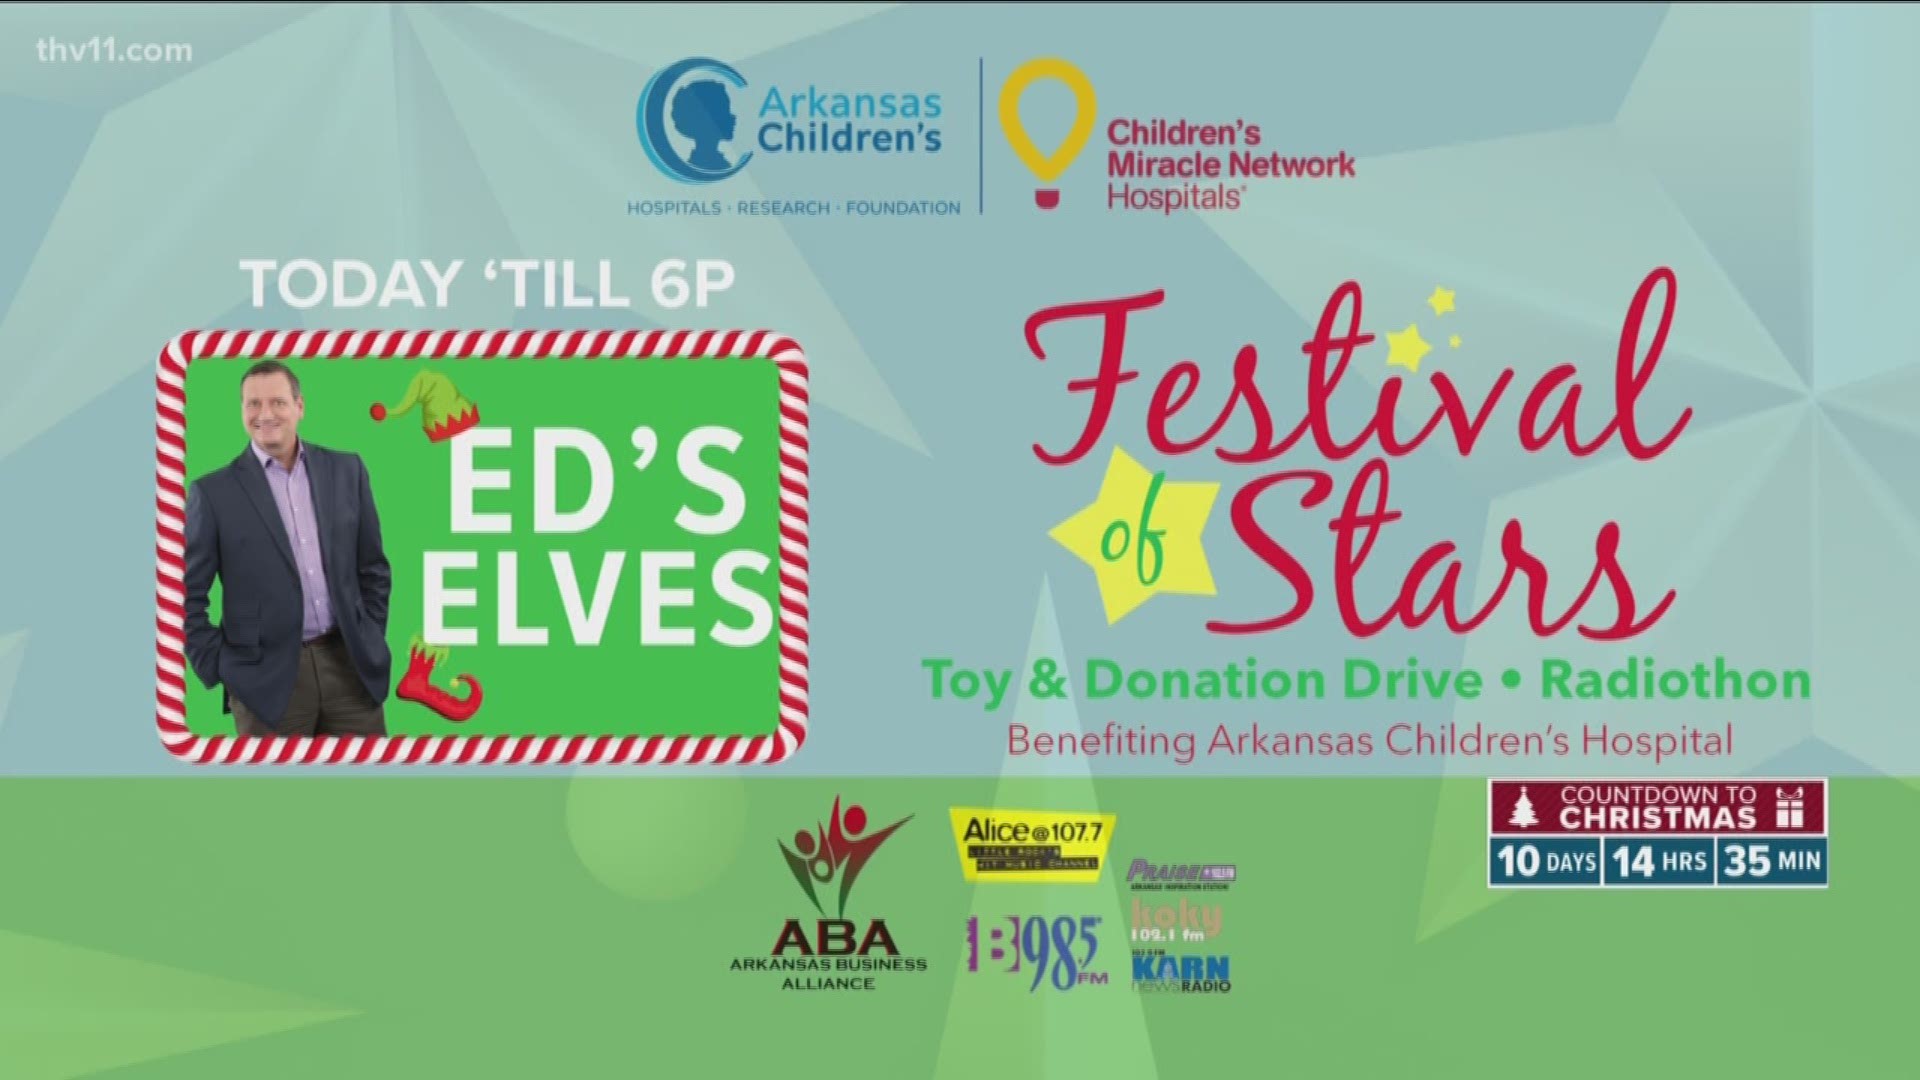 Ed is asking for donations to the Festival of Stars at Arkansas Children's Hospital.